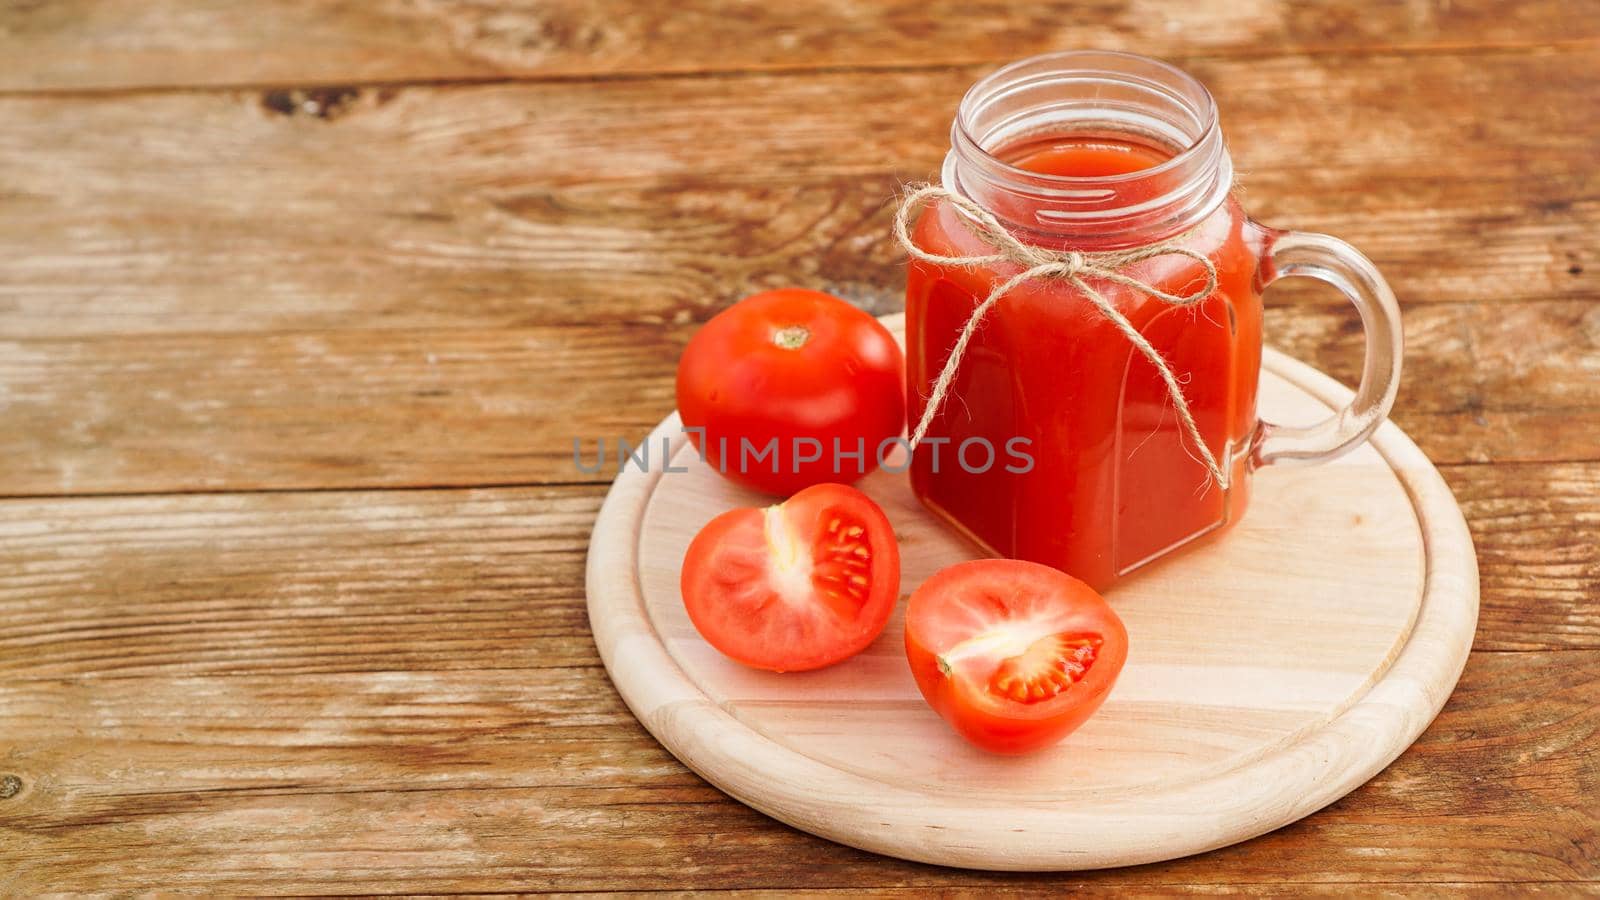 Glass of tomato juice on wooden table. Fresh tomato juice and chopped tomatoes on wooden board